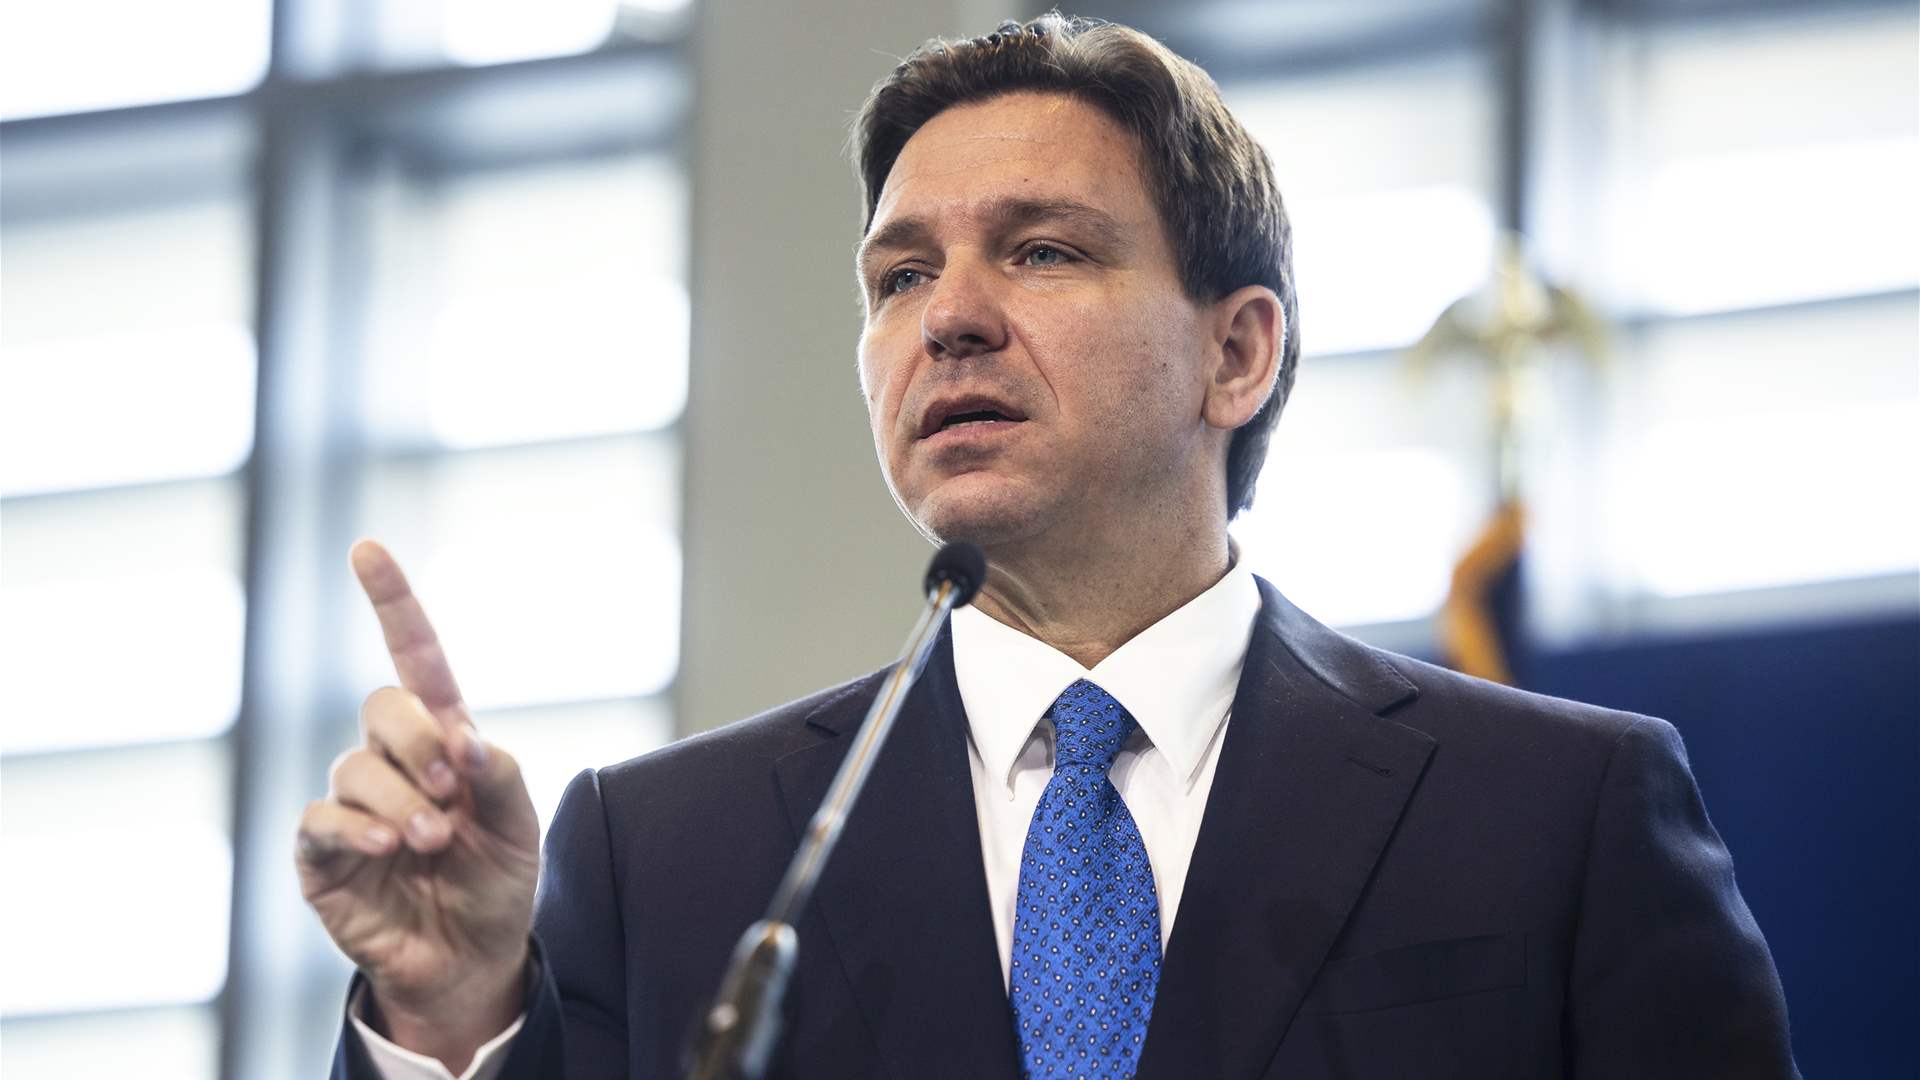 DeSantis to stump in early voting states after rocky presidential launch